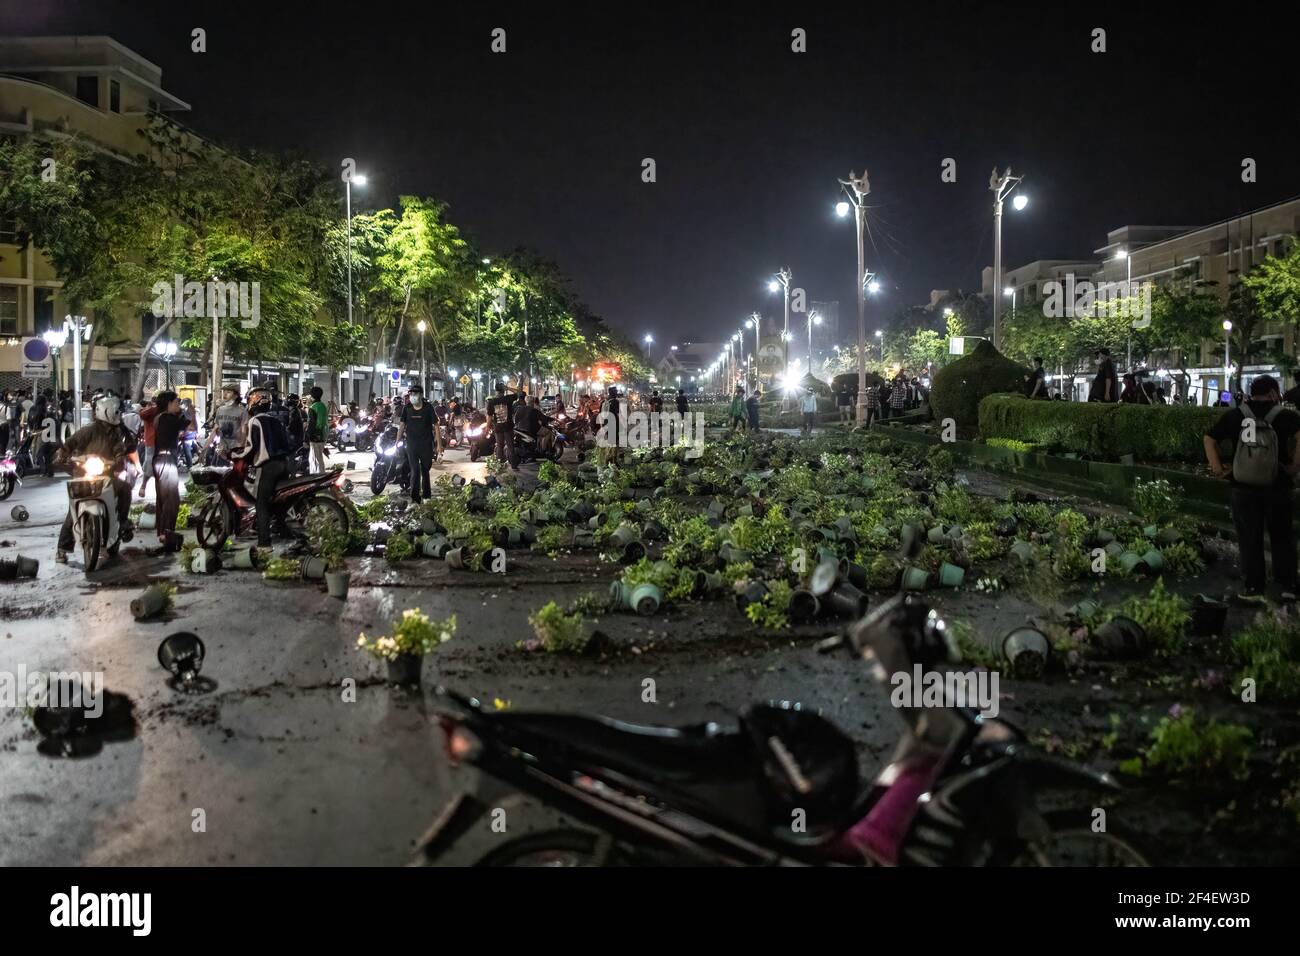 Pro democracy protesters vandalized the plants on Ratchadamnoen Avenue during an anti-government demonstration in Bangkok. Thousands of pro-democracy protesters gathered near the Grand Palace in Sanam Luang demanding the resignation of Thailand Prime Minister and the reform of the monarchy. The protesters also denounced the use of the Lese Majeste law under the section 112 of the penal code. The protest organized by REDEM (Restart Democracy) ended up with several clashes, the use of water cannon, tear gas and rubber bullet, which had left several injured. (Photo by Geem Drake / SOPA Images/Sip Stock Photo